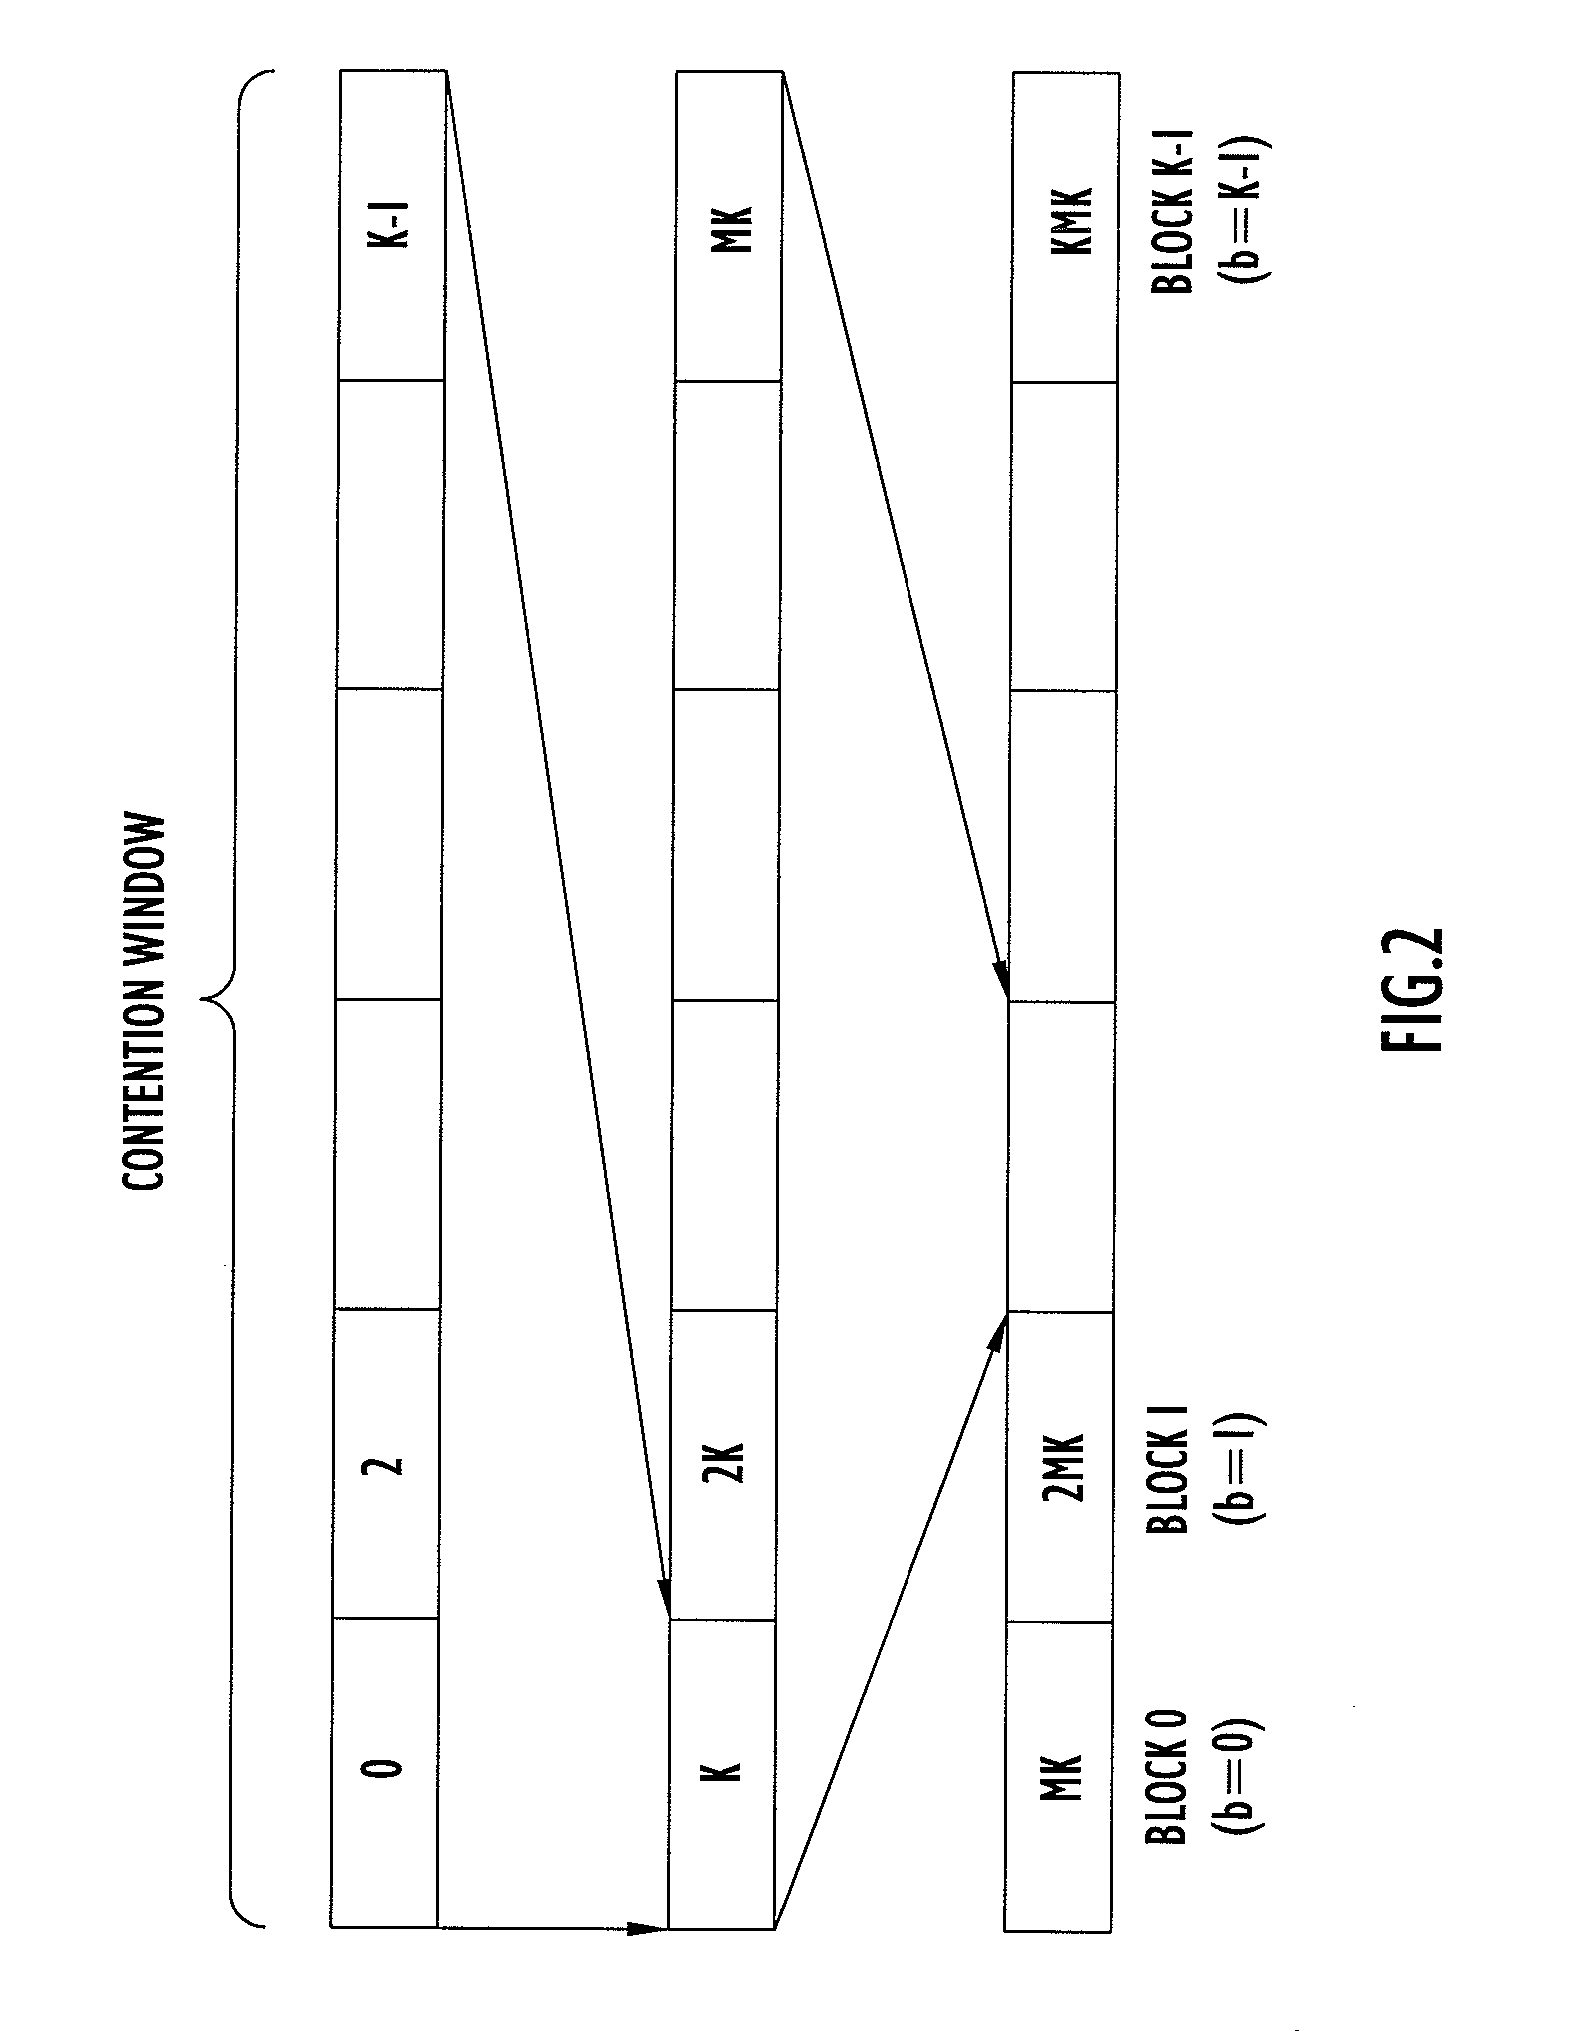 Nearly Collision-Free Channel Access System and Method